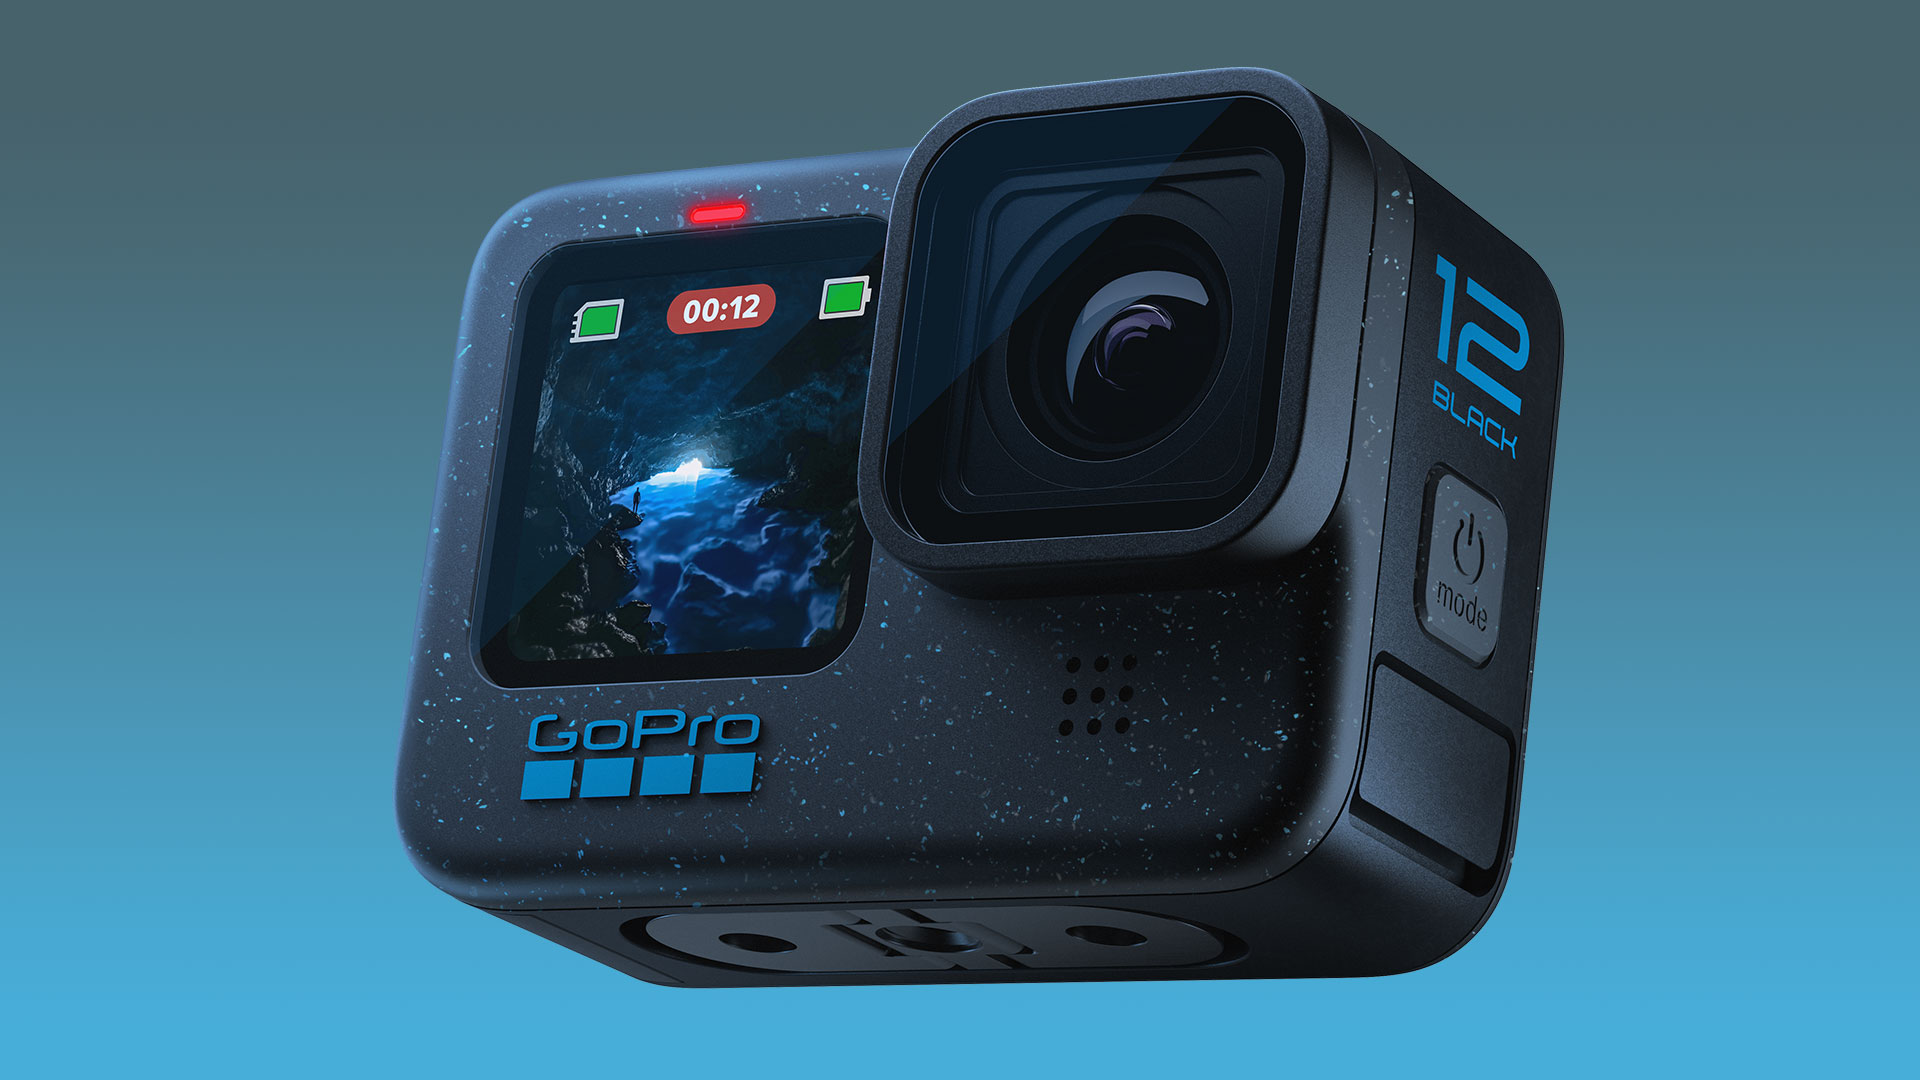 GoPro Hero 12 Black review: better for pros and beginners